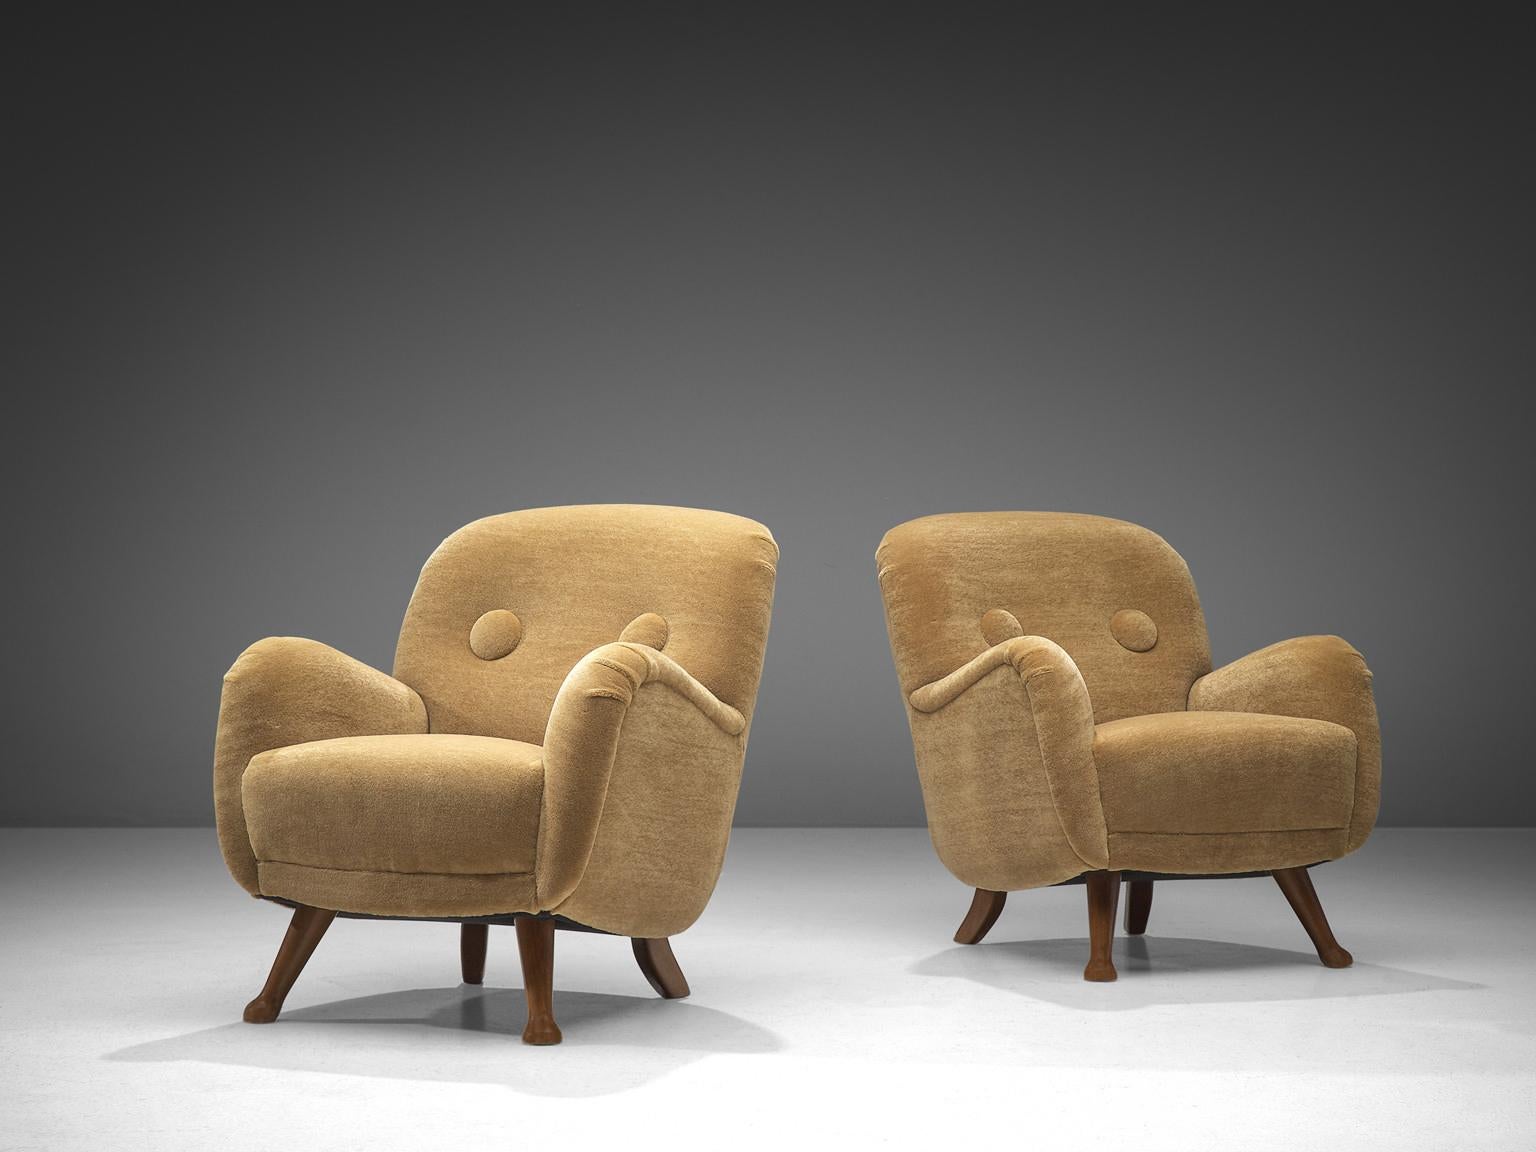 Berga Mobler, armchairs, beige teddy fabric, beech, Denmark, 1940s.

This bold and curvy pair of armchairs are very comfortable and strong singular items. The whole shell is slightly tilted backwards. The shell rests on four small beech legs that